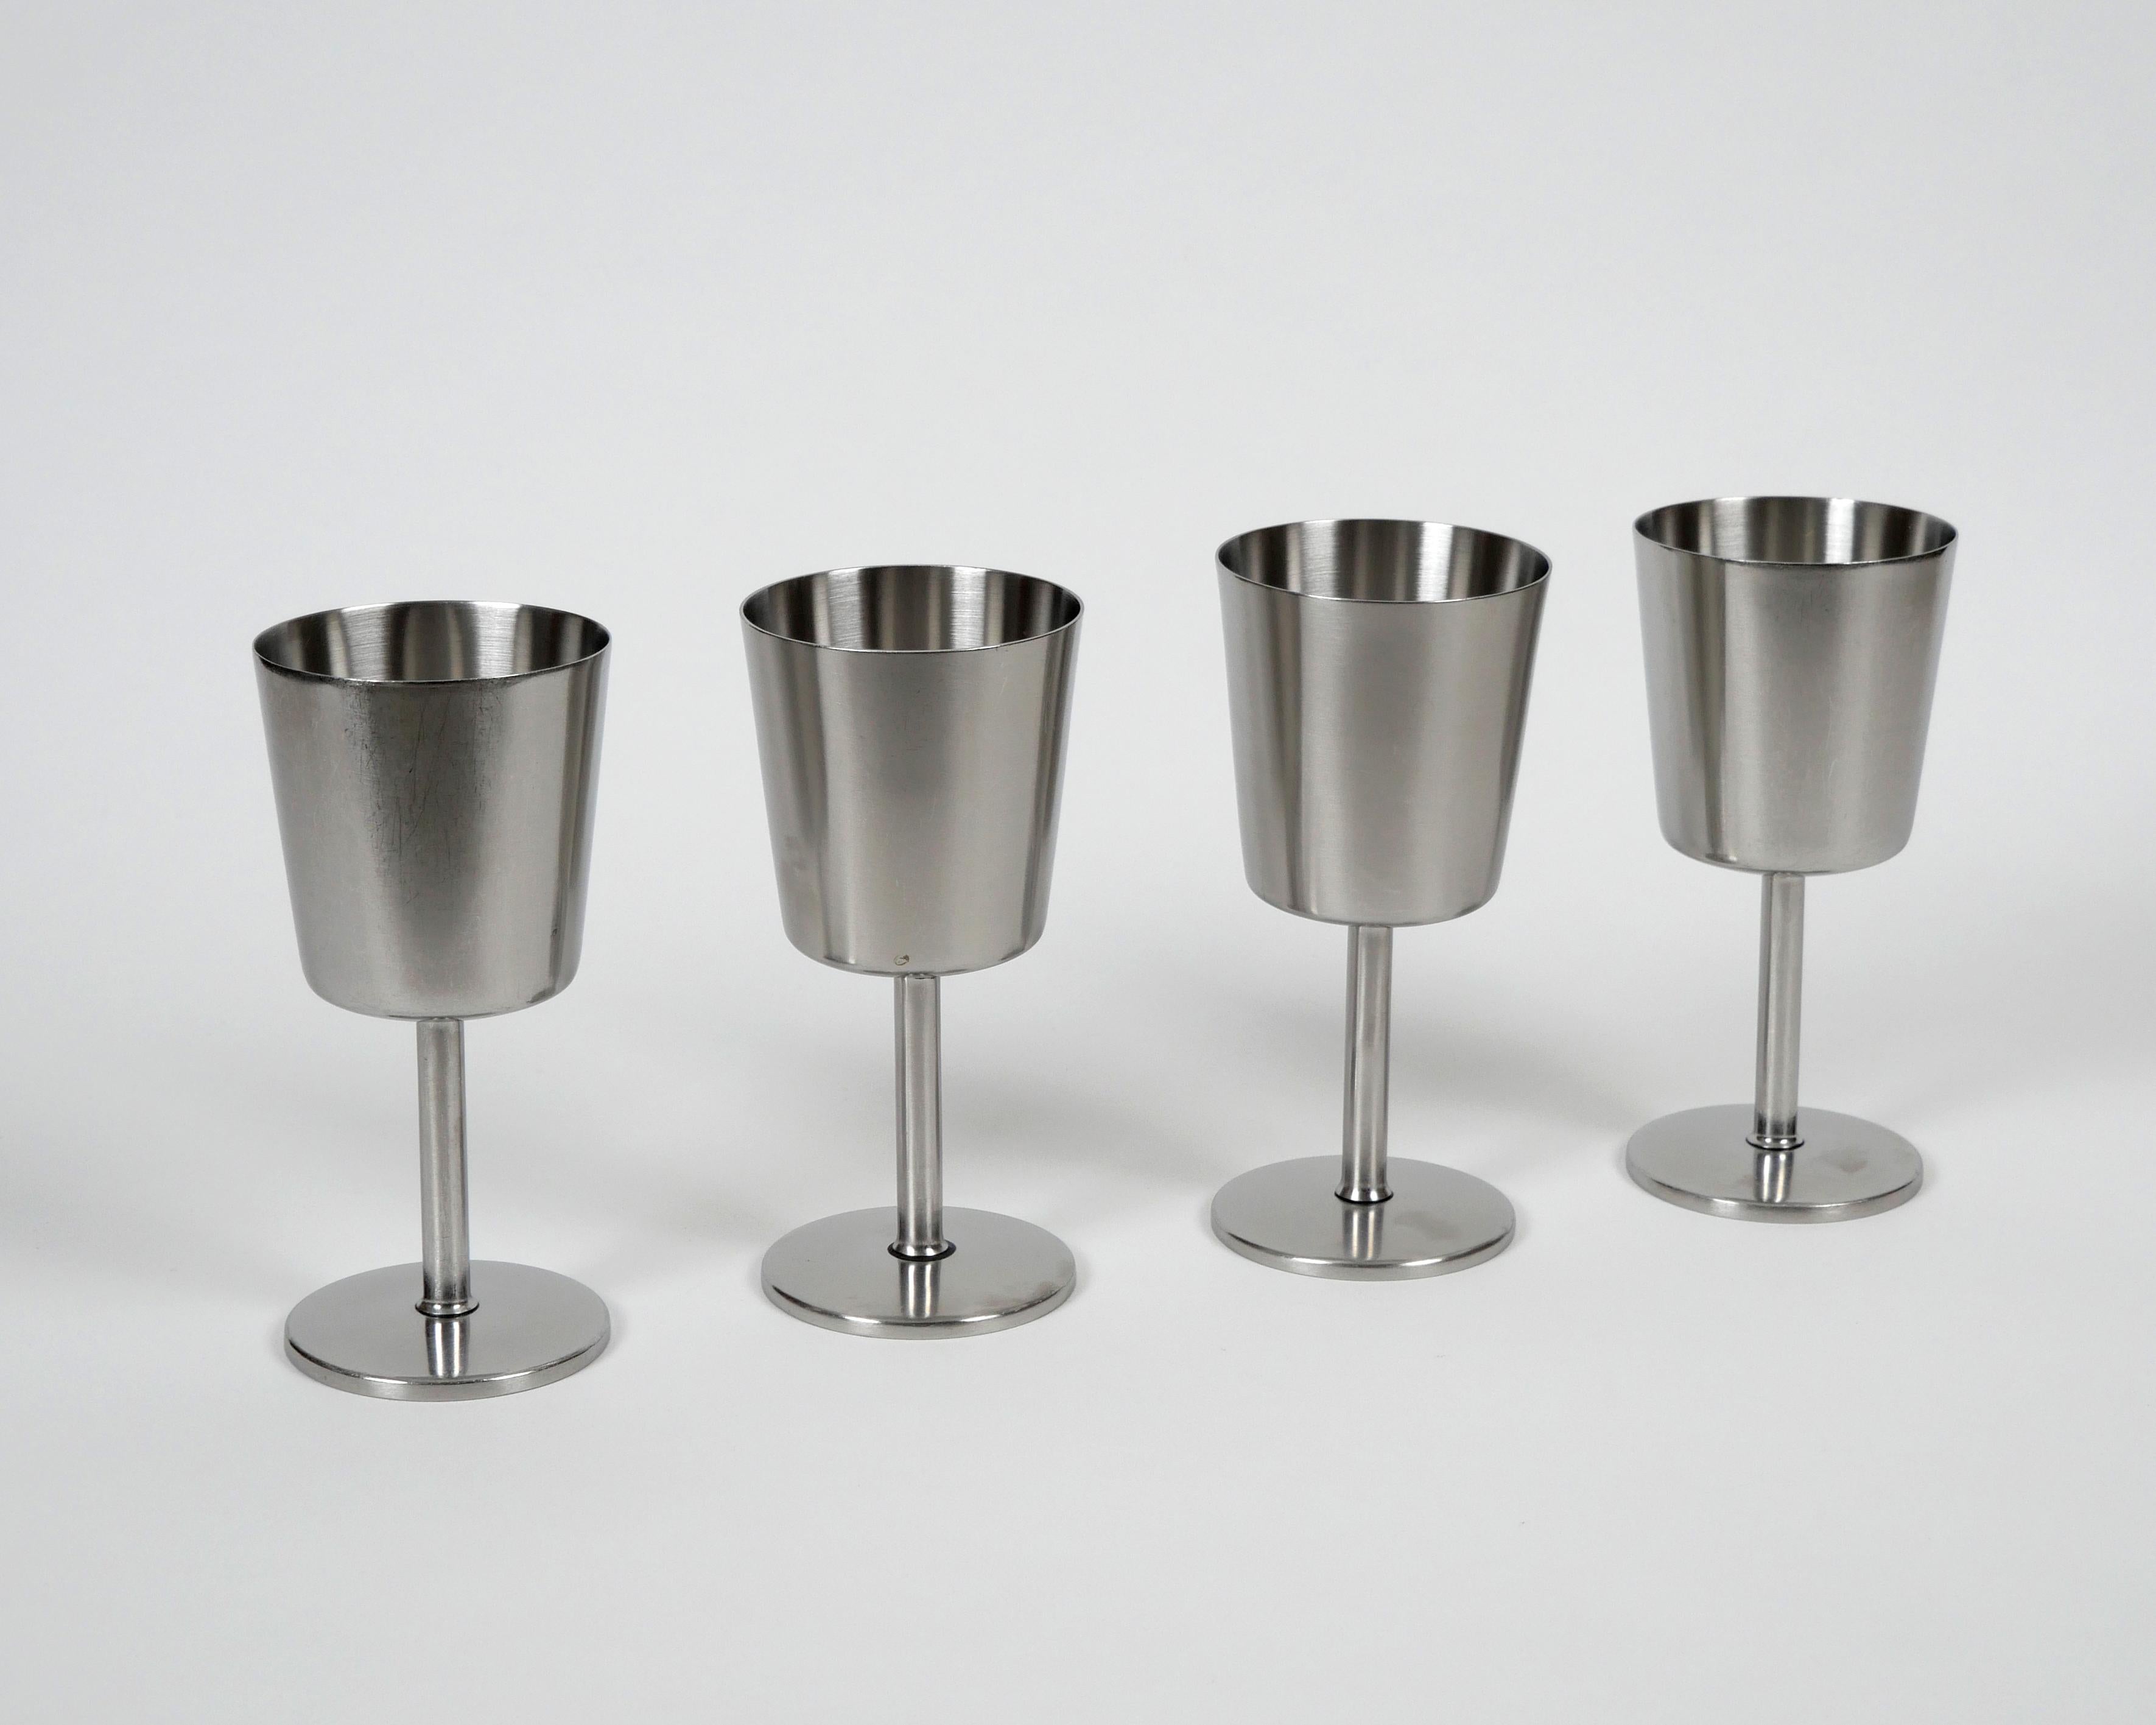 Robert Welch for Old Hall, 1960s
Set of 4 Wine goblets

Stainless steel
Good condition, two have light marks and signs of use, two appear to be unused.
Makers stamp to underside of each

Dimensions each approx.: diameter 6.9 cm, height